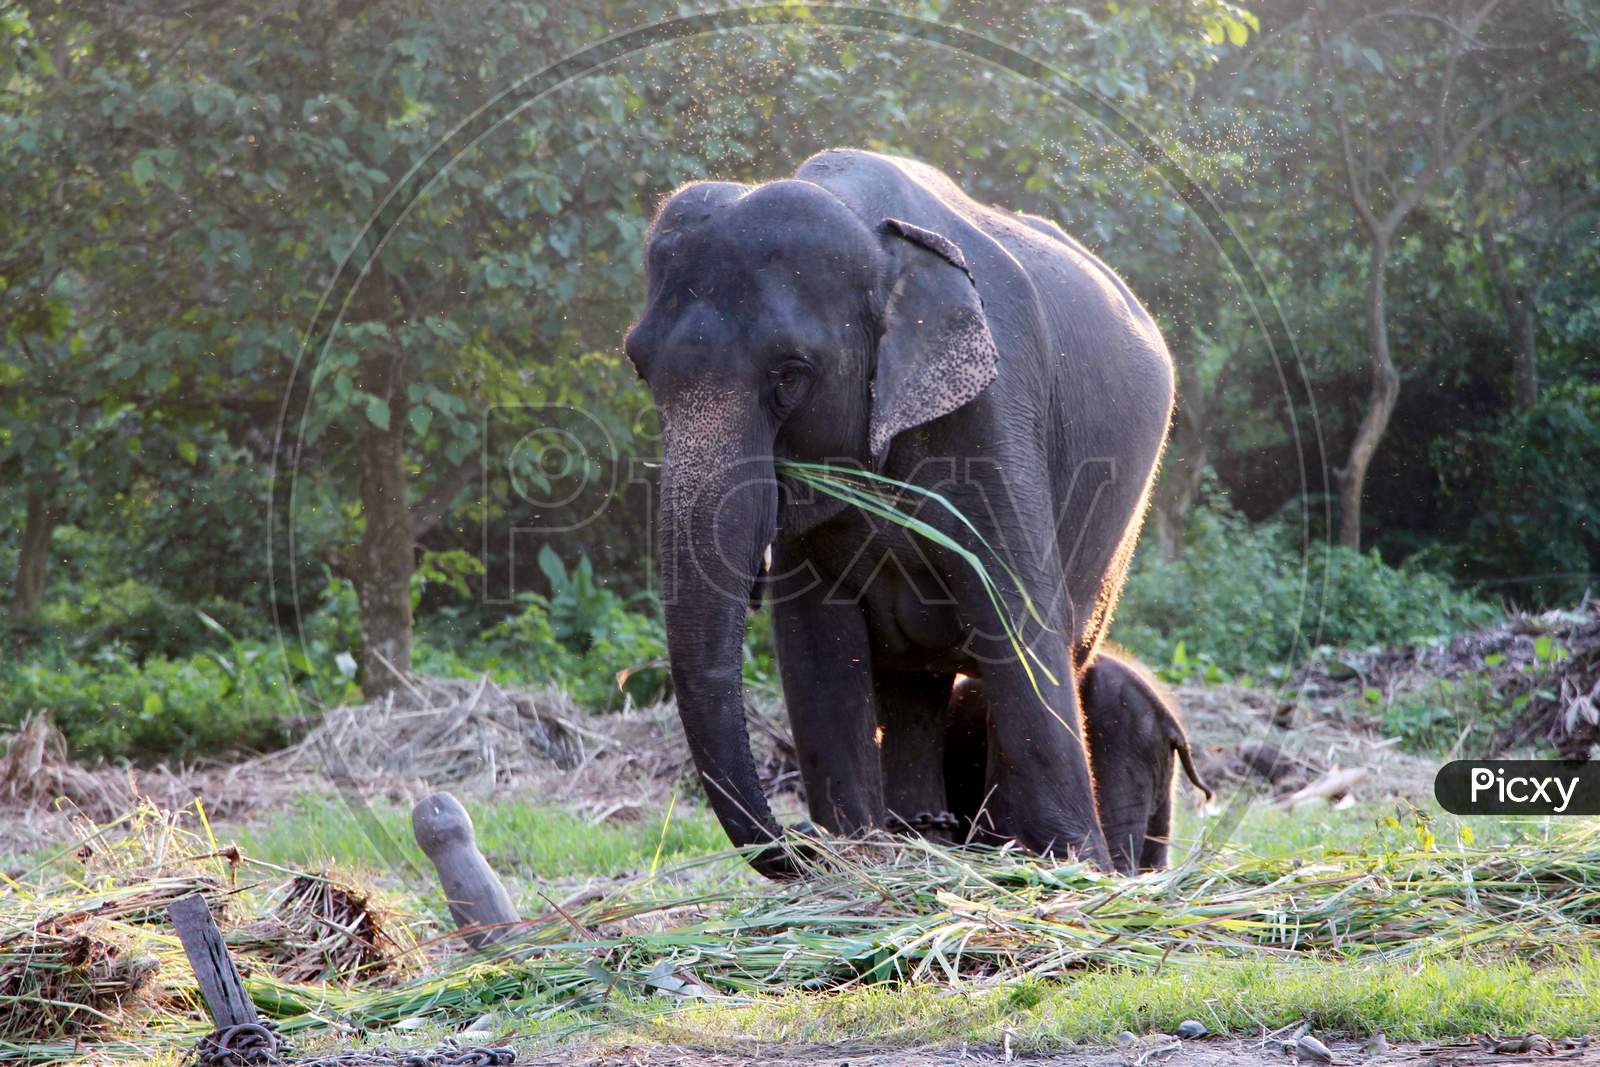 An Elephant eating Grass in a Zoo